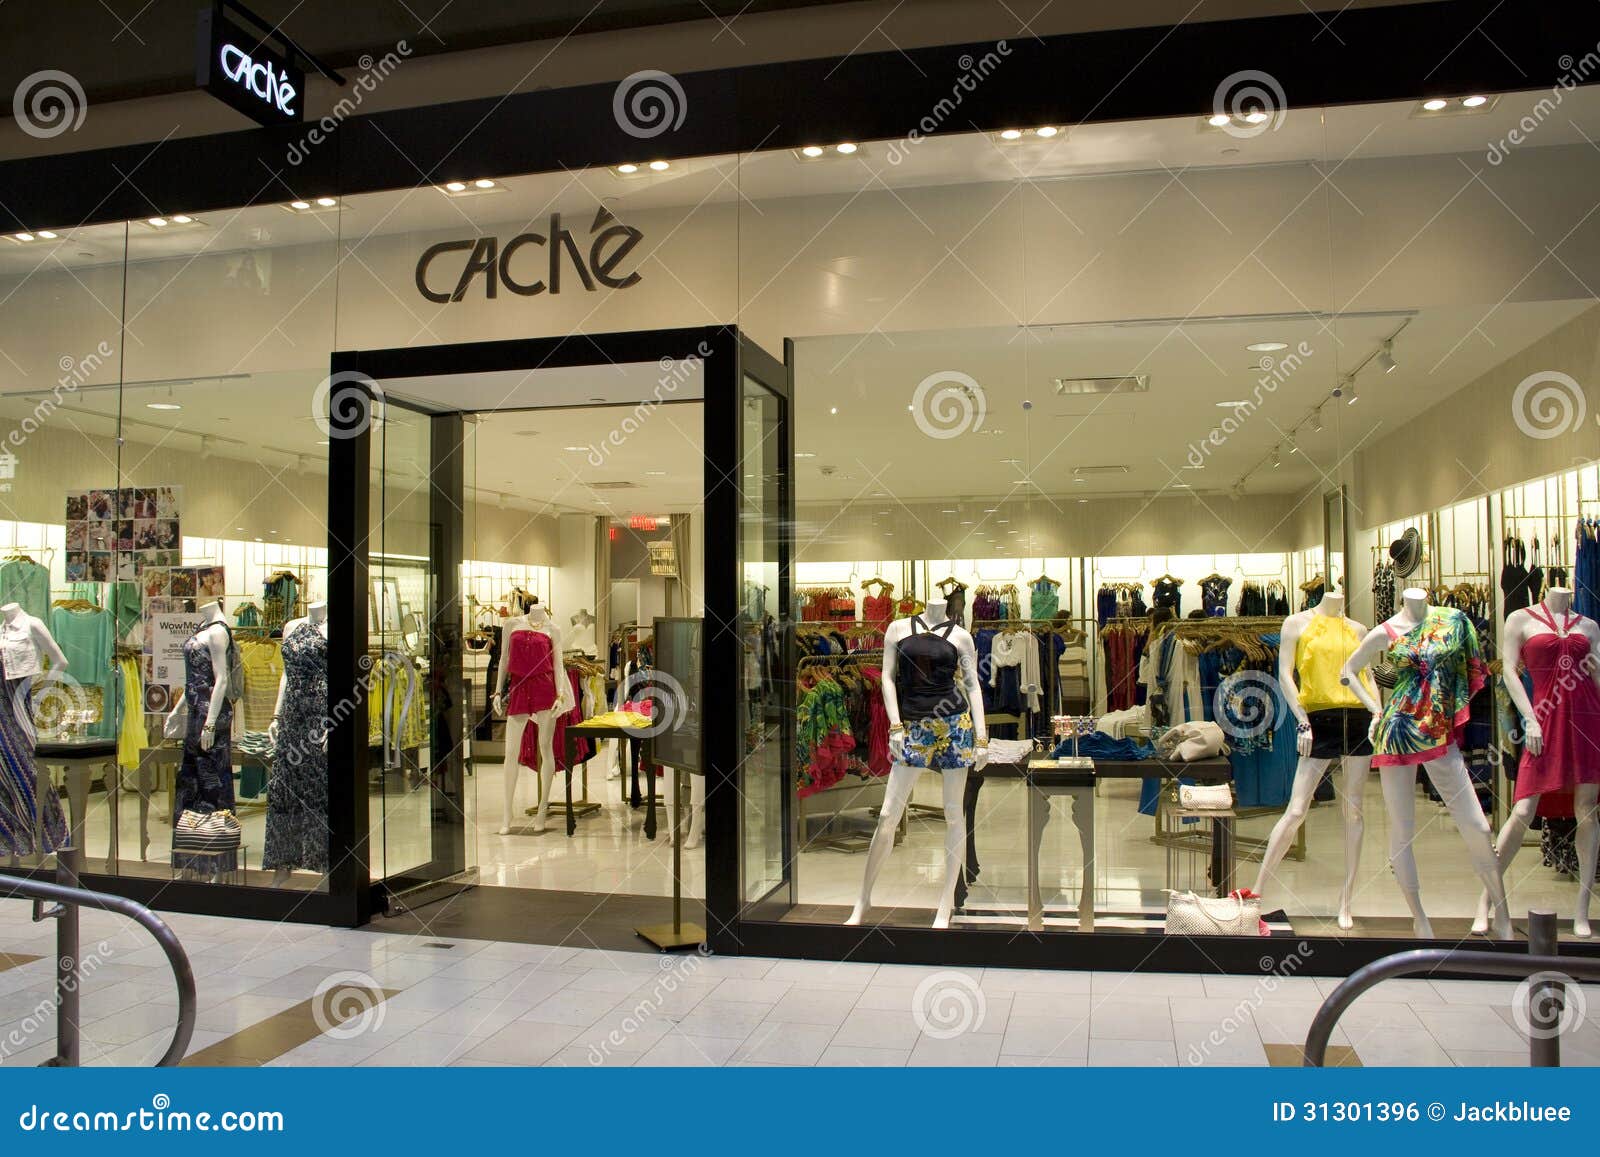 Caclie clothing store editorial photo. Image of lighting - 31301396